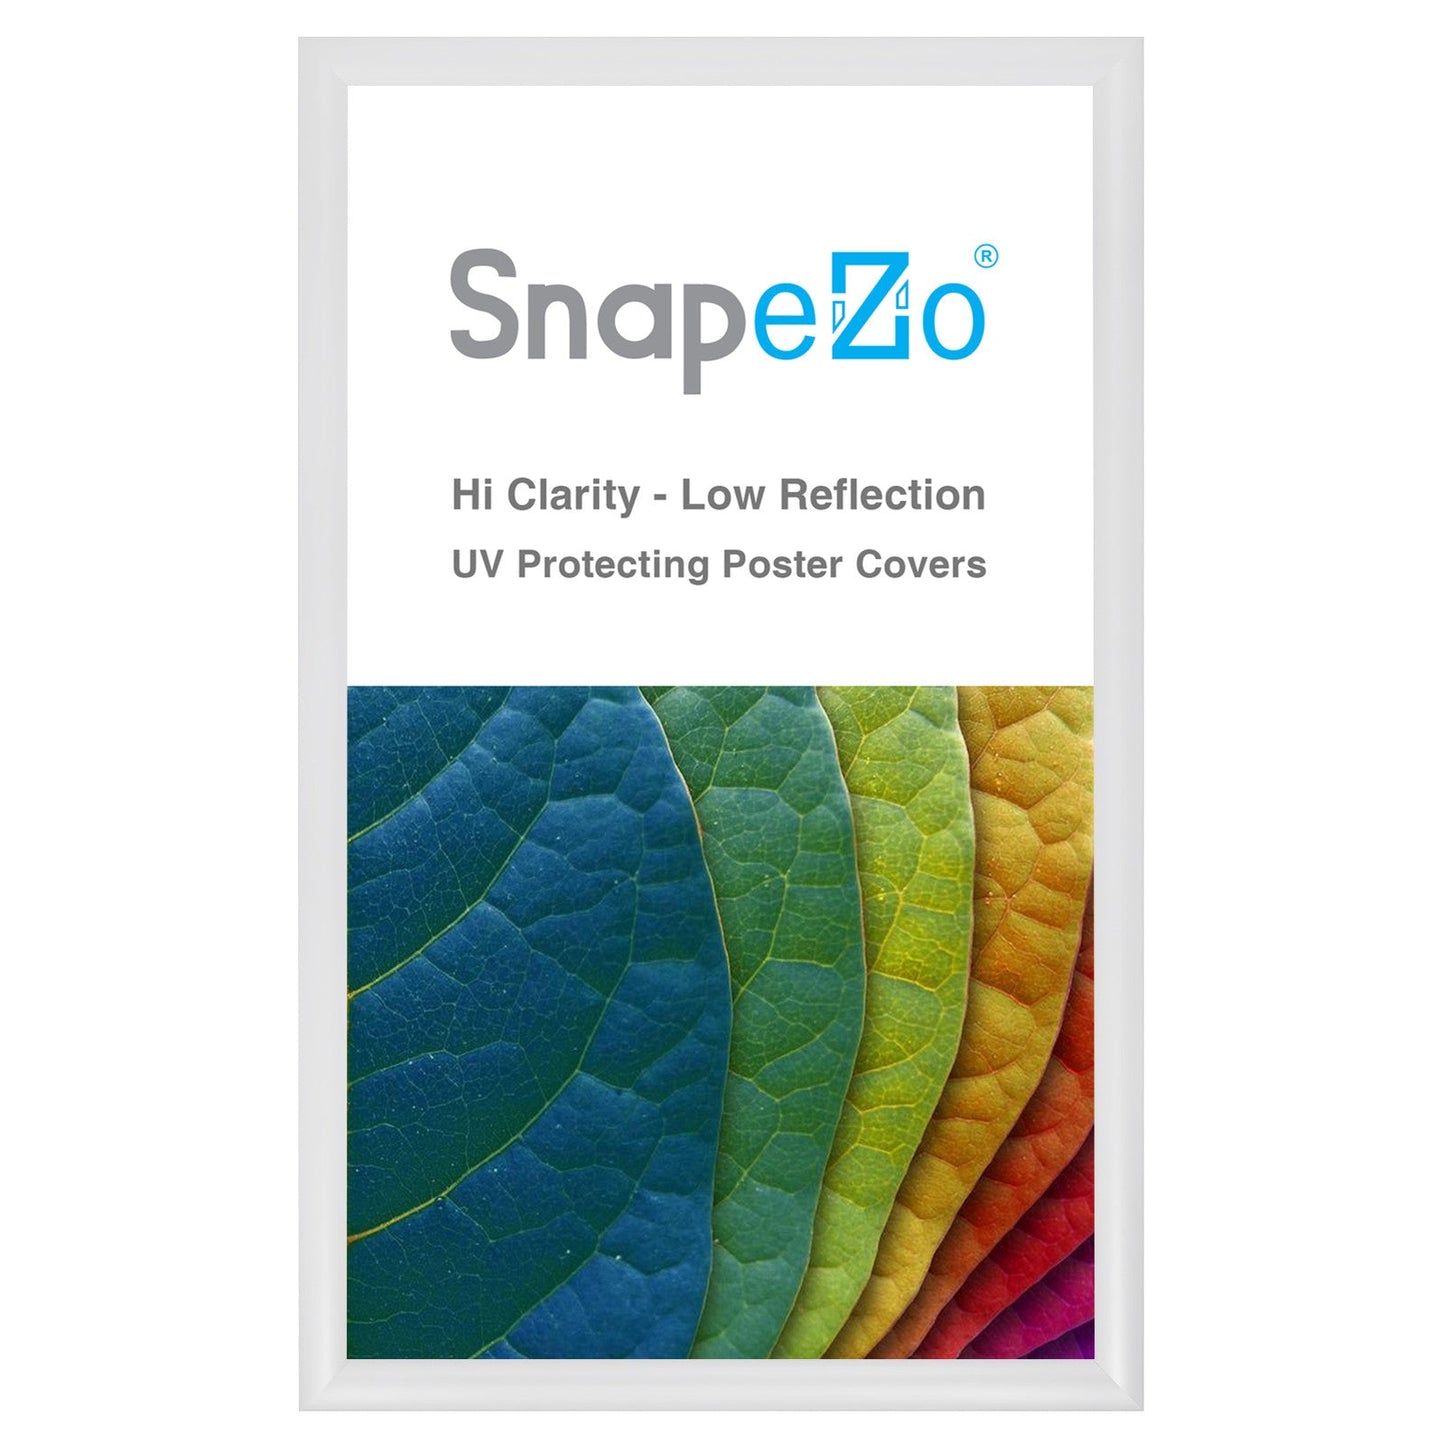 Load image into Gallery viewer, 15x25 White SnapeZo® Snap Frame - 1.2&amp;quot; Profile
